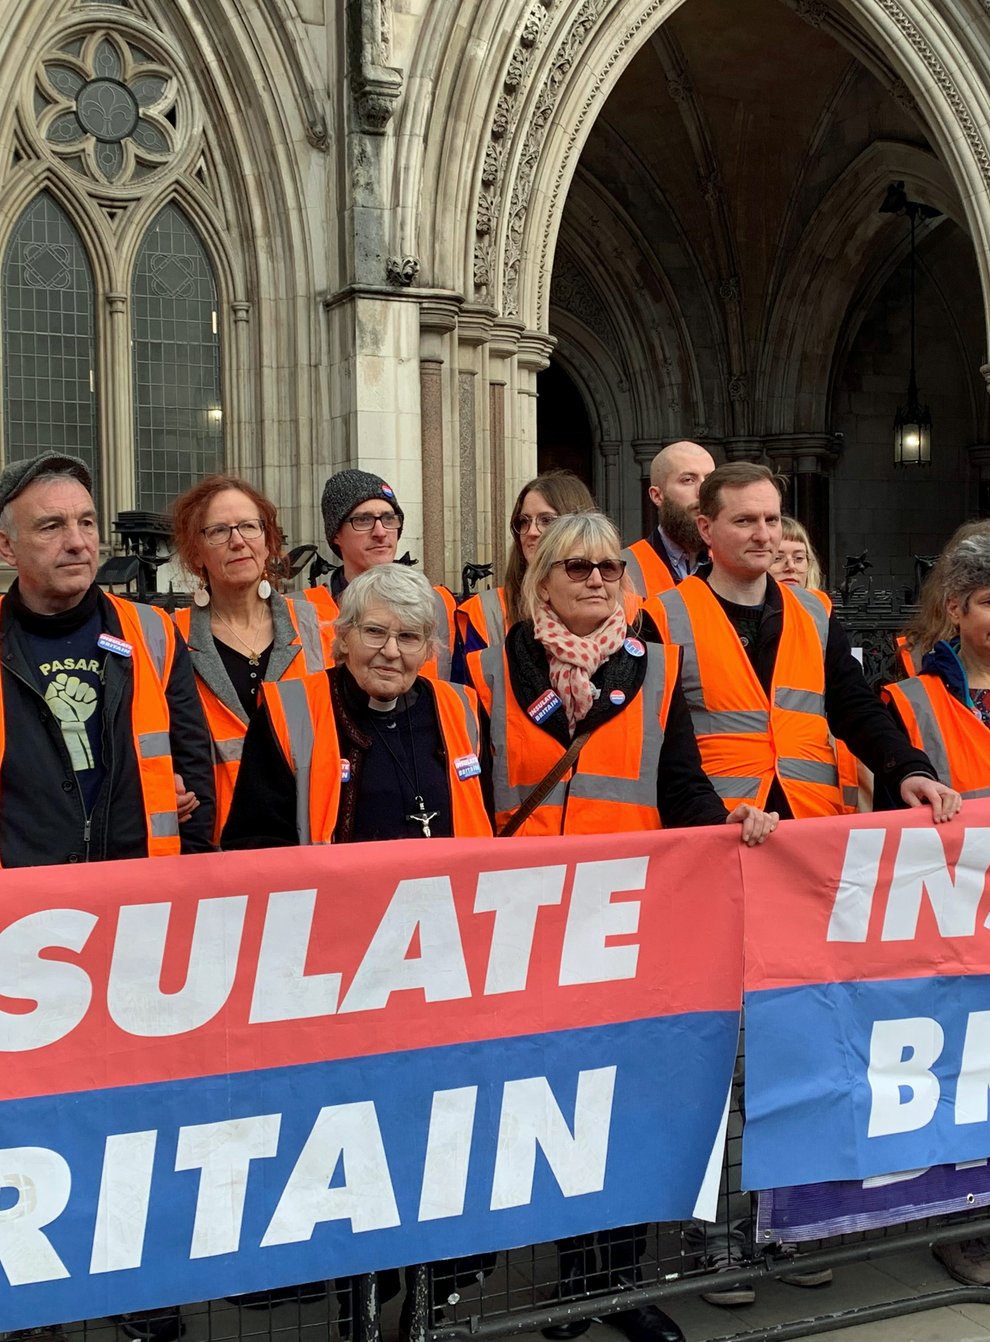 Insulate Britain activists said they have ‘failed’ but vowed to continue their climate change protests despite some members being jailed (Tom Pilgrim/PA)